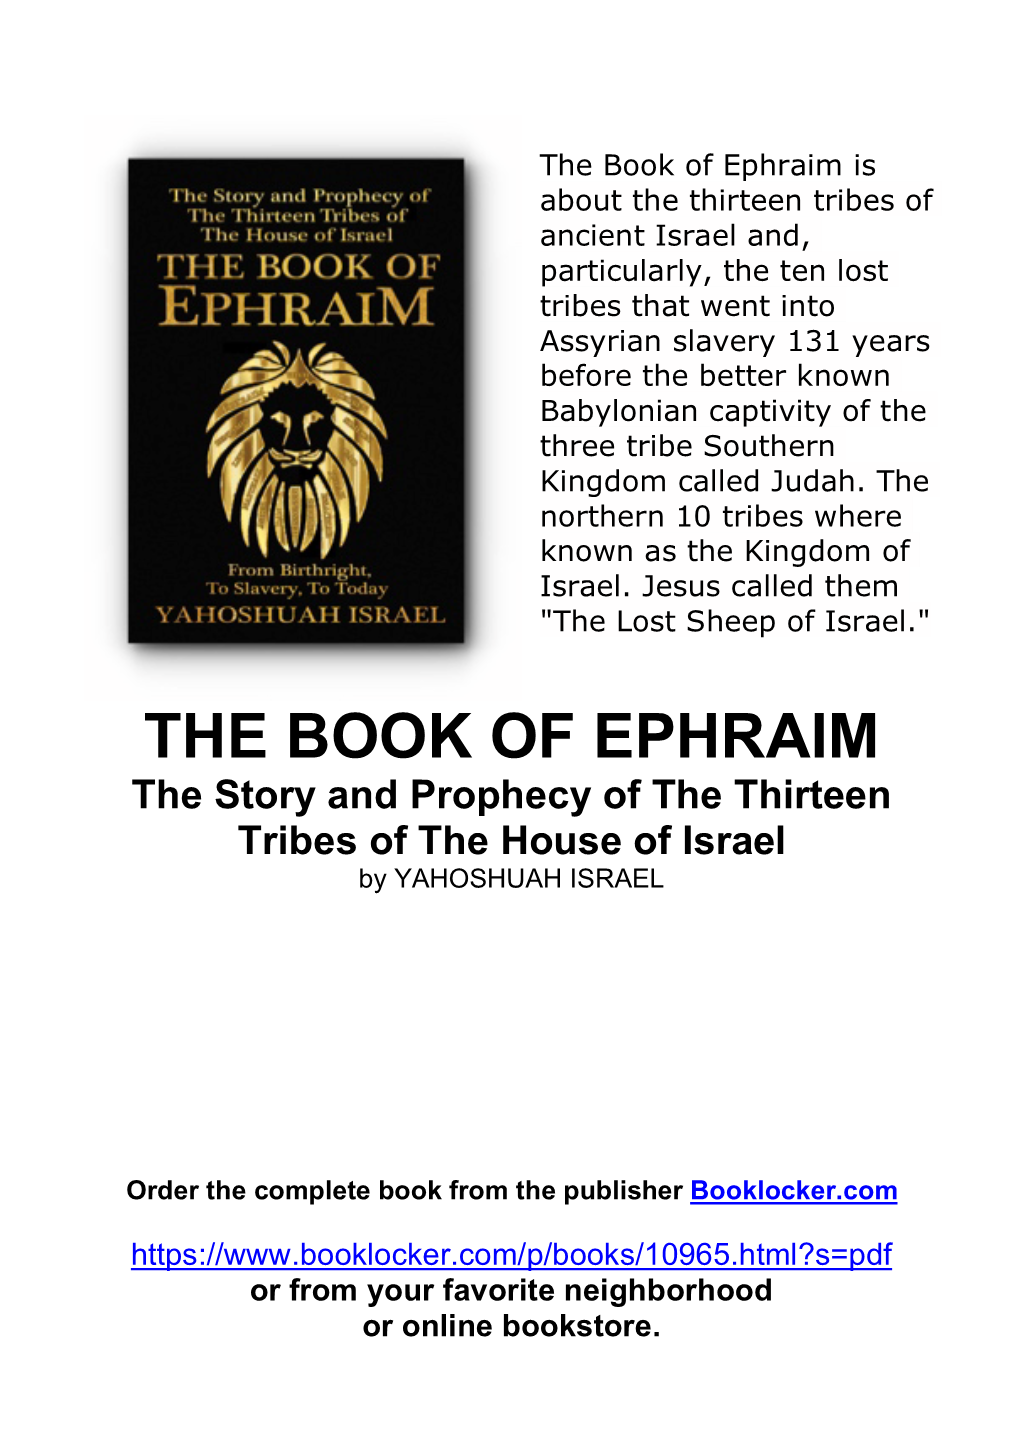 [PDF] the BOOK of EPHRAIM:The Story and Prophecy of the Thirteen Tribes of the House